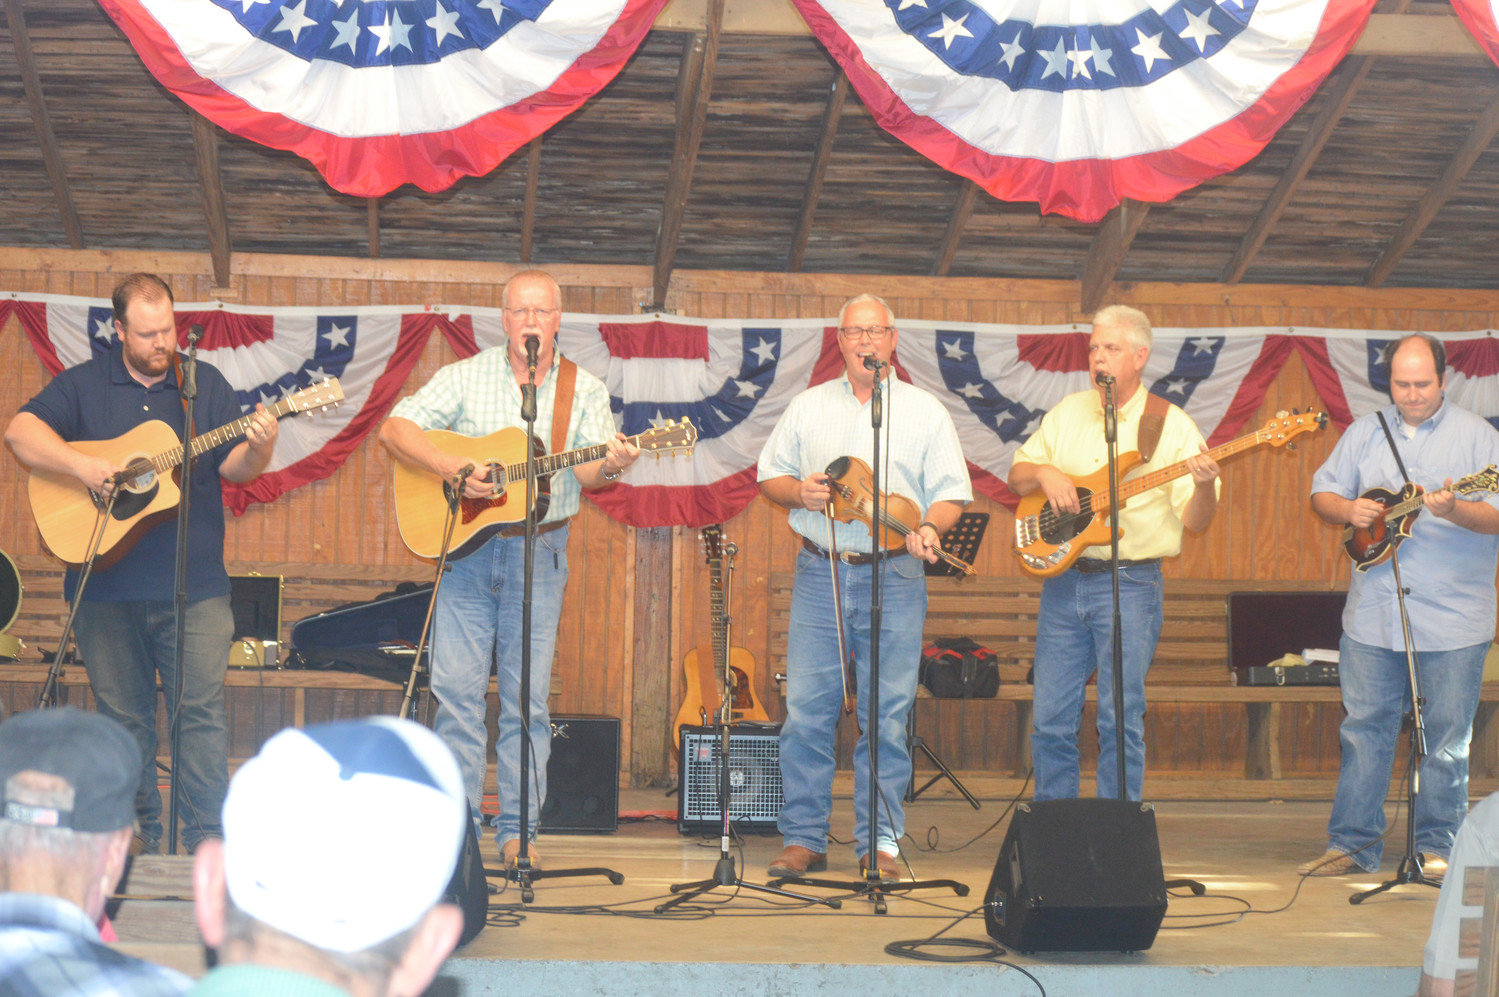 Right Direction Bluegrass played their special brand of gospel music Friday night at the 116th Old Settlers Reunion in Quitman at Jim Hogg City Park.